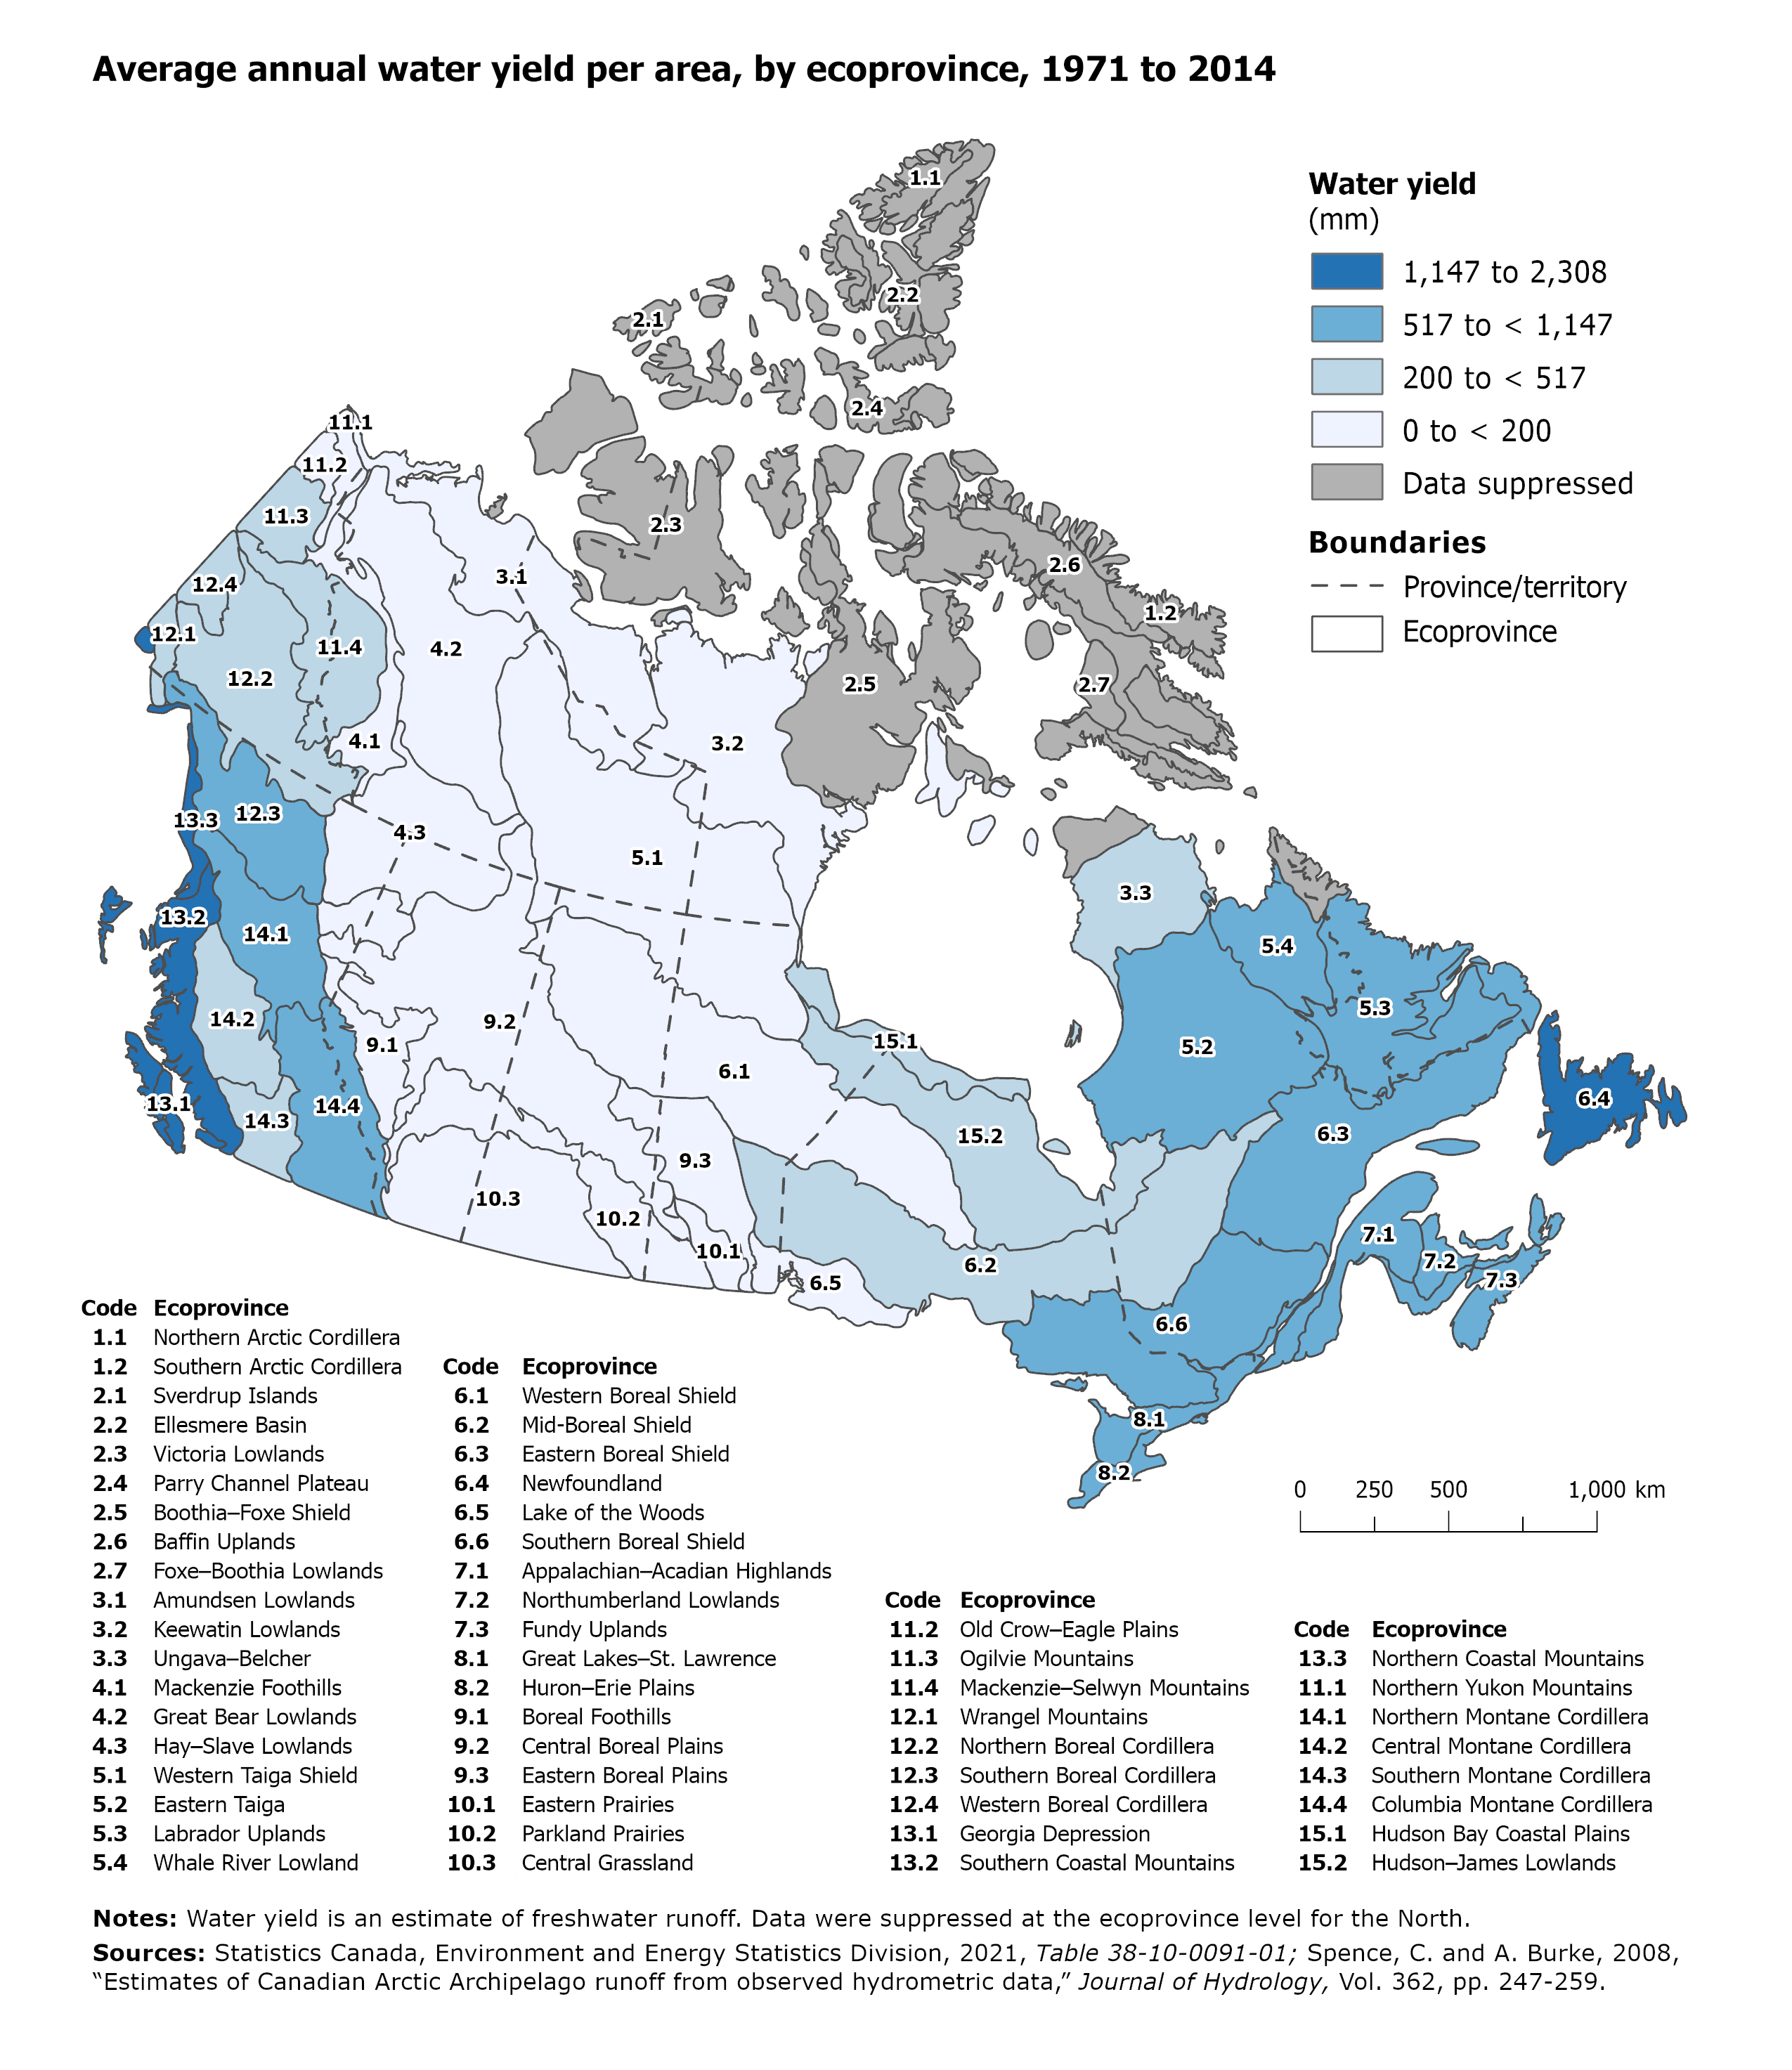 Map: Average annual water yield per area, by ecoprovince, 1971 to 2014